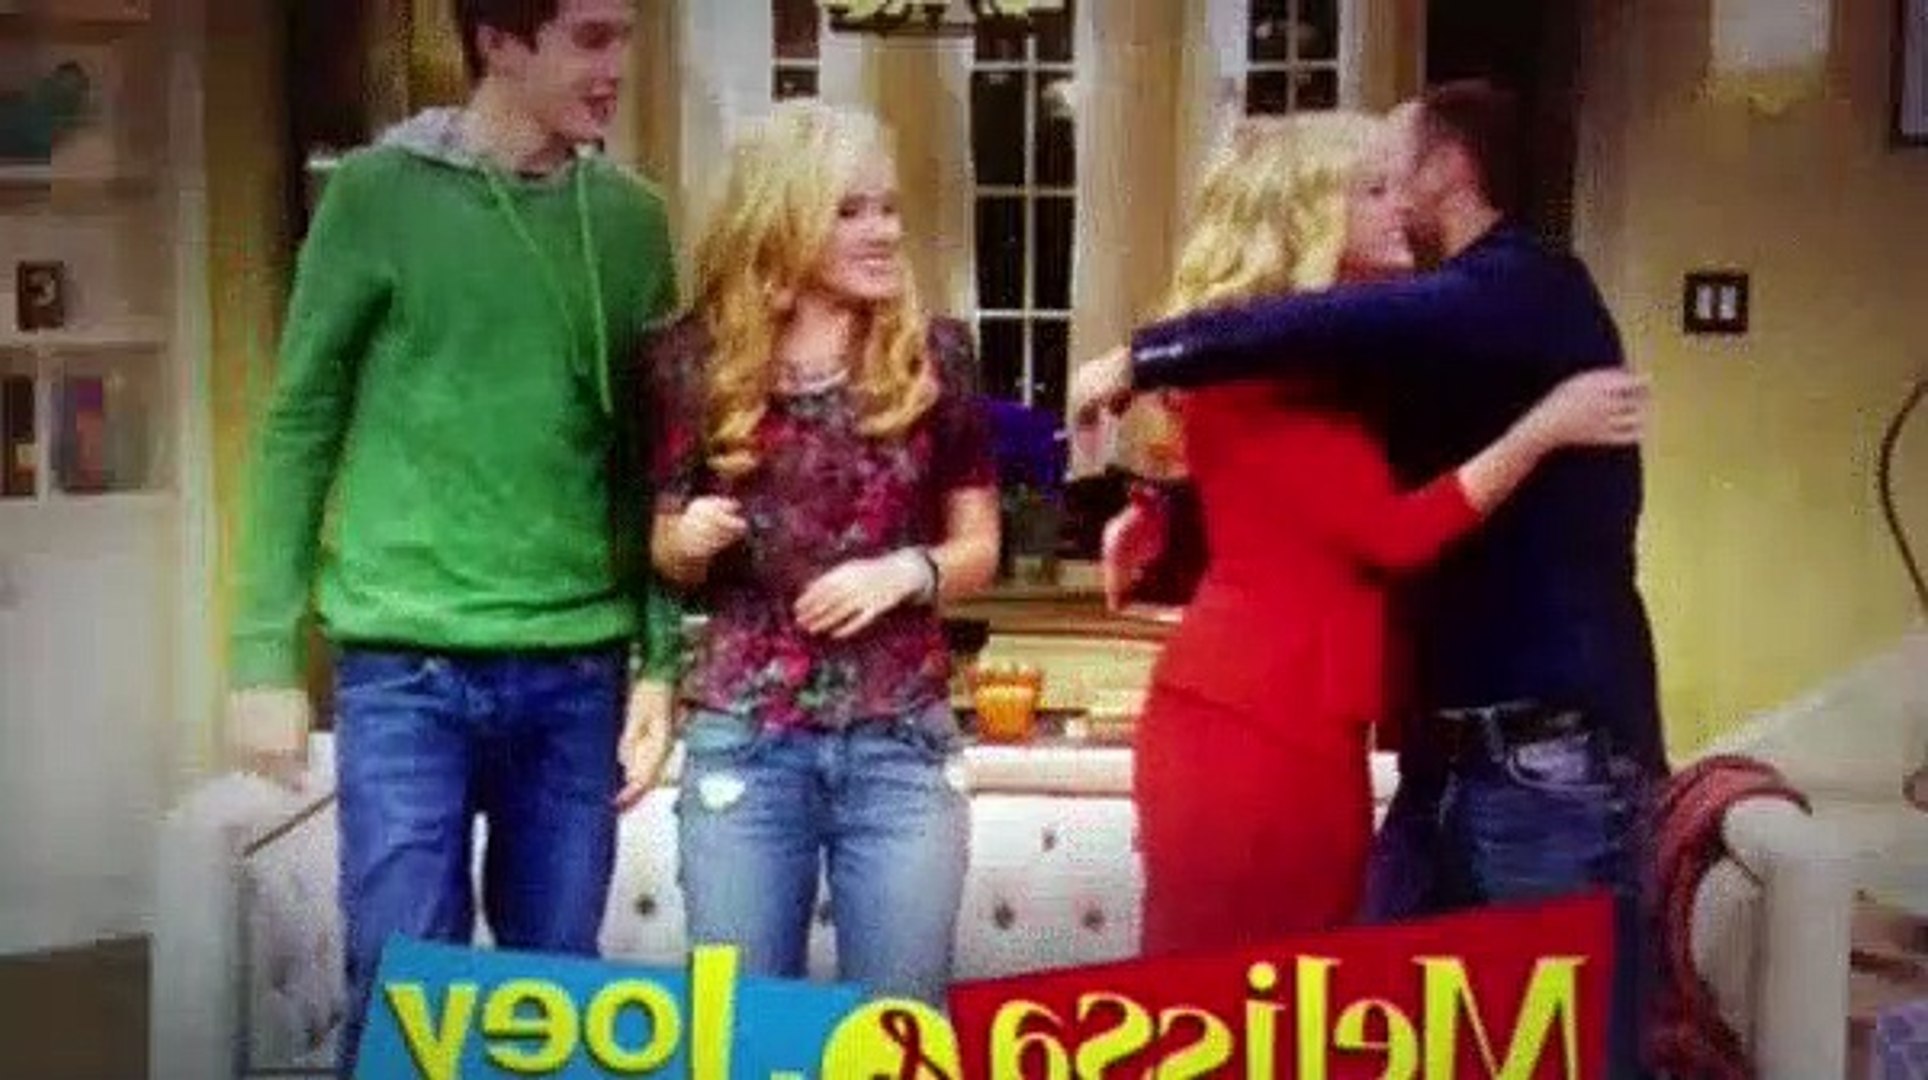 Melissa And Joey S03E25 - video Dailymotion